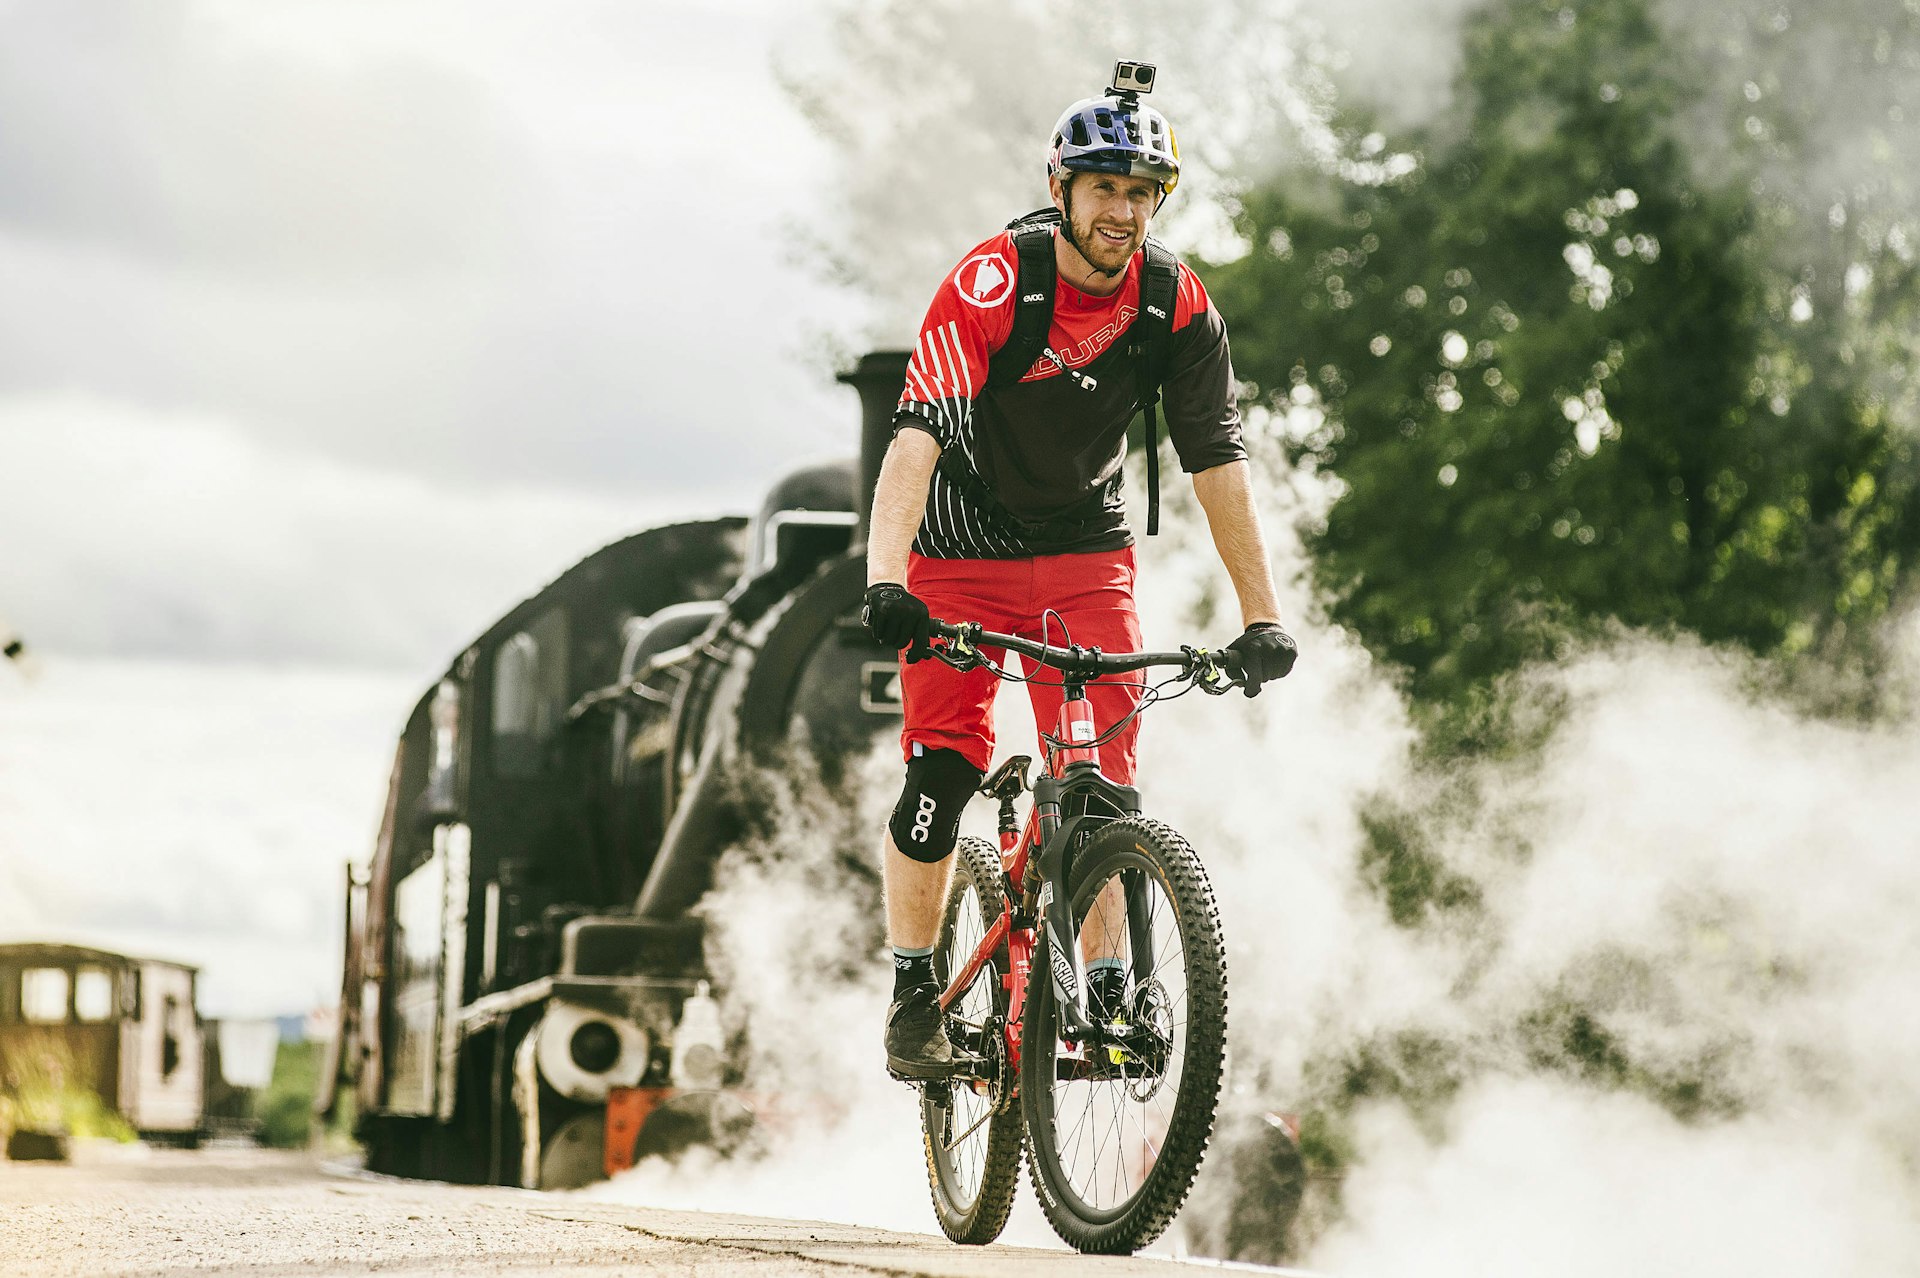 Daredevil Danny MacAskill on conquering his fear of the unknown